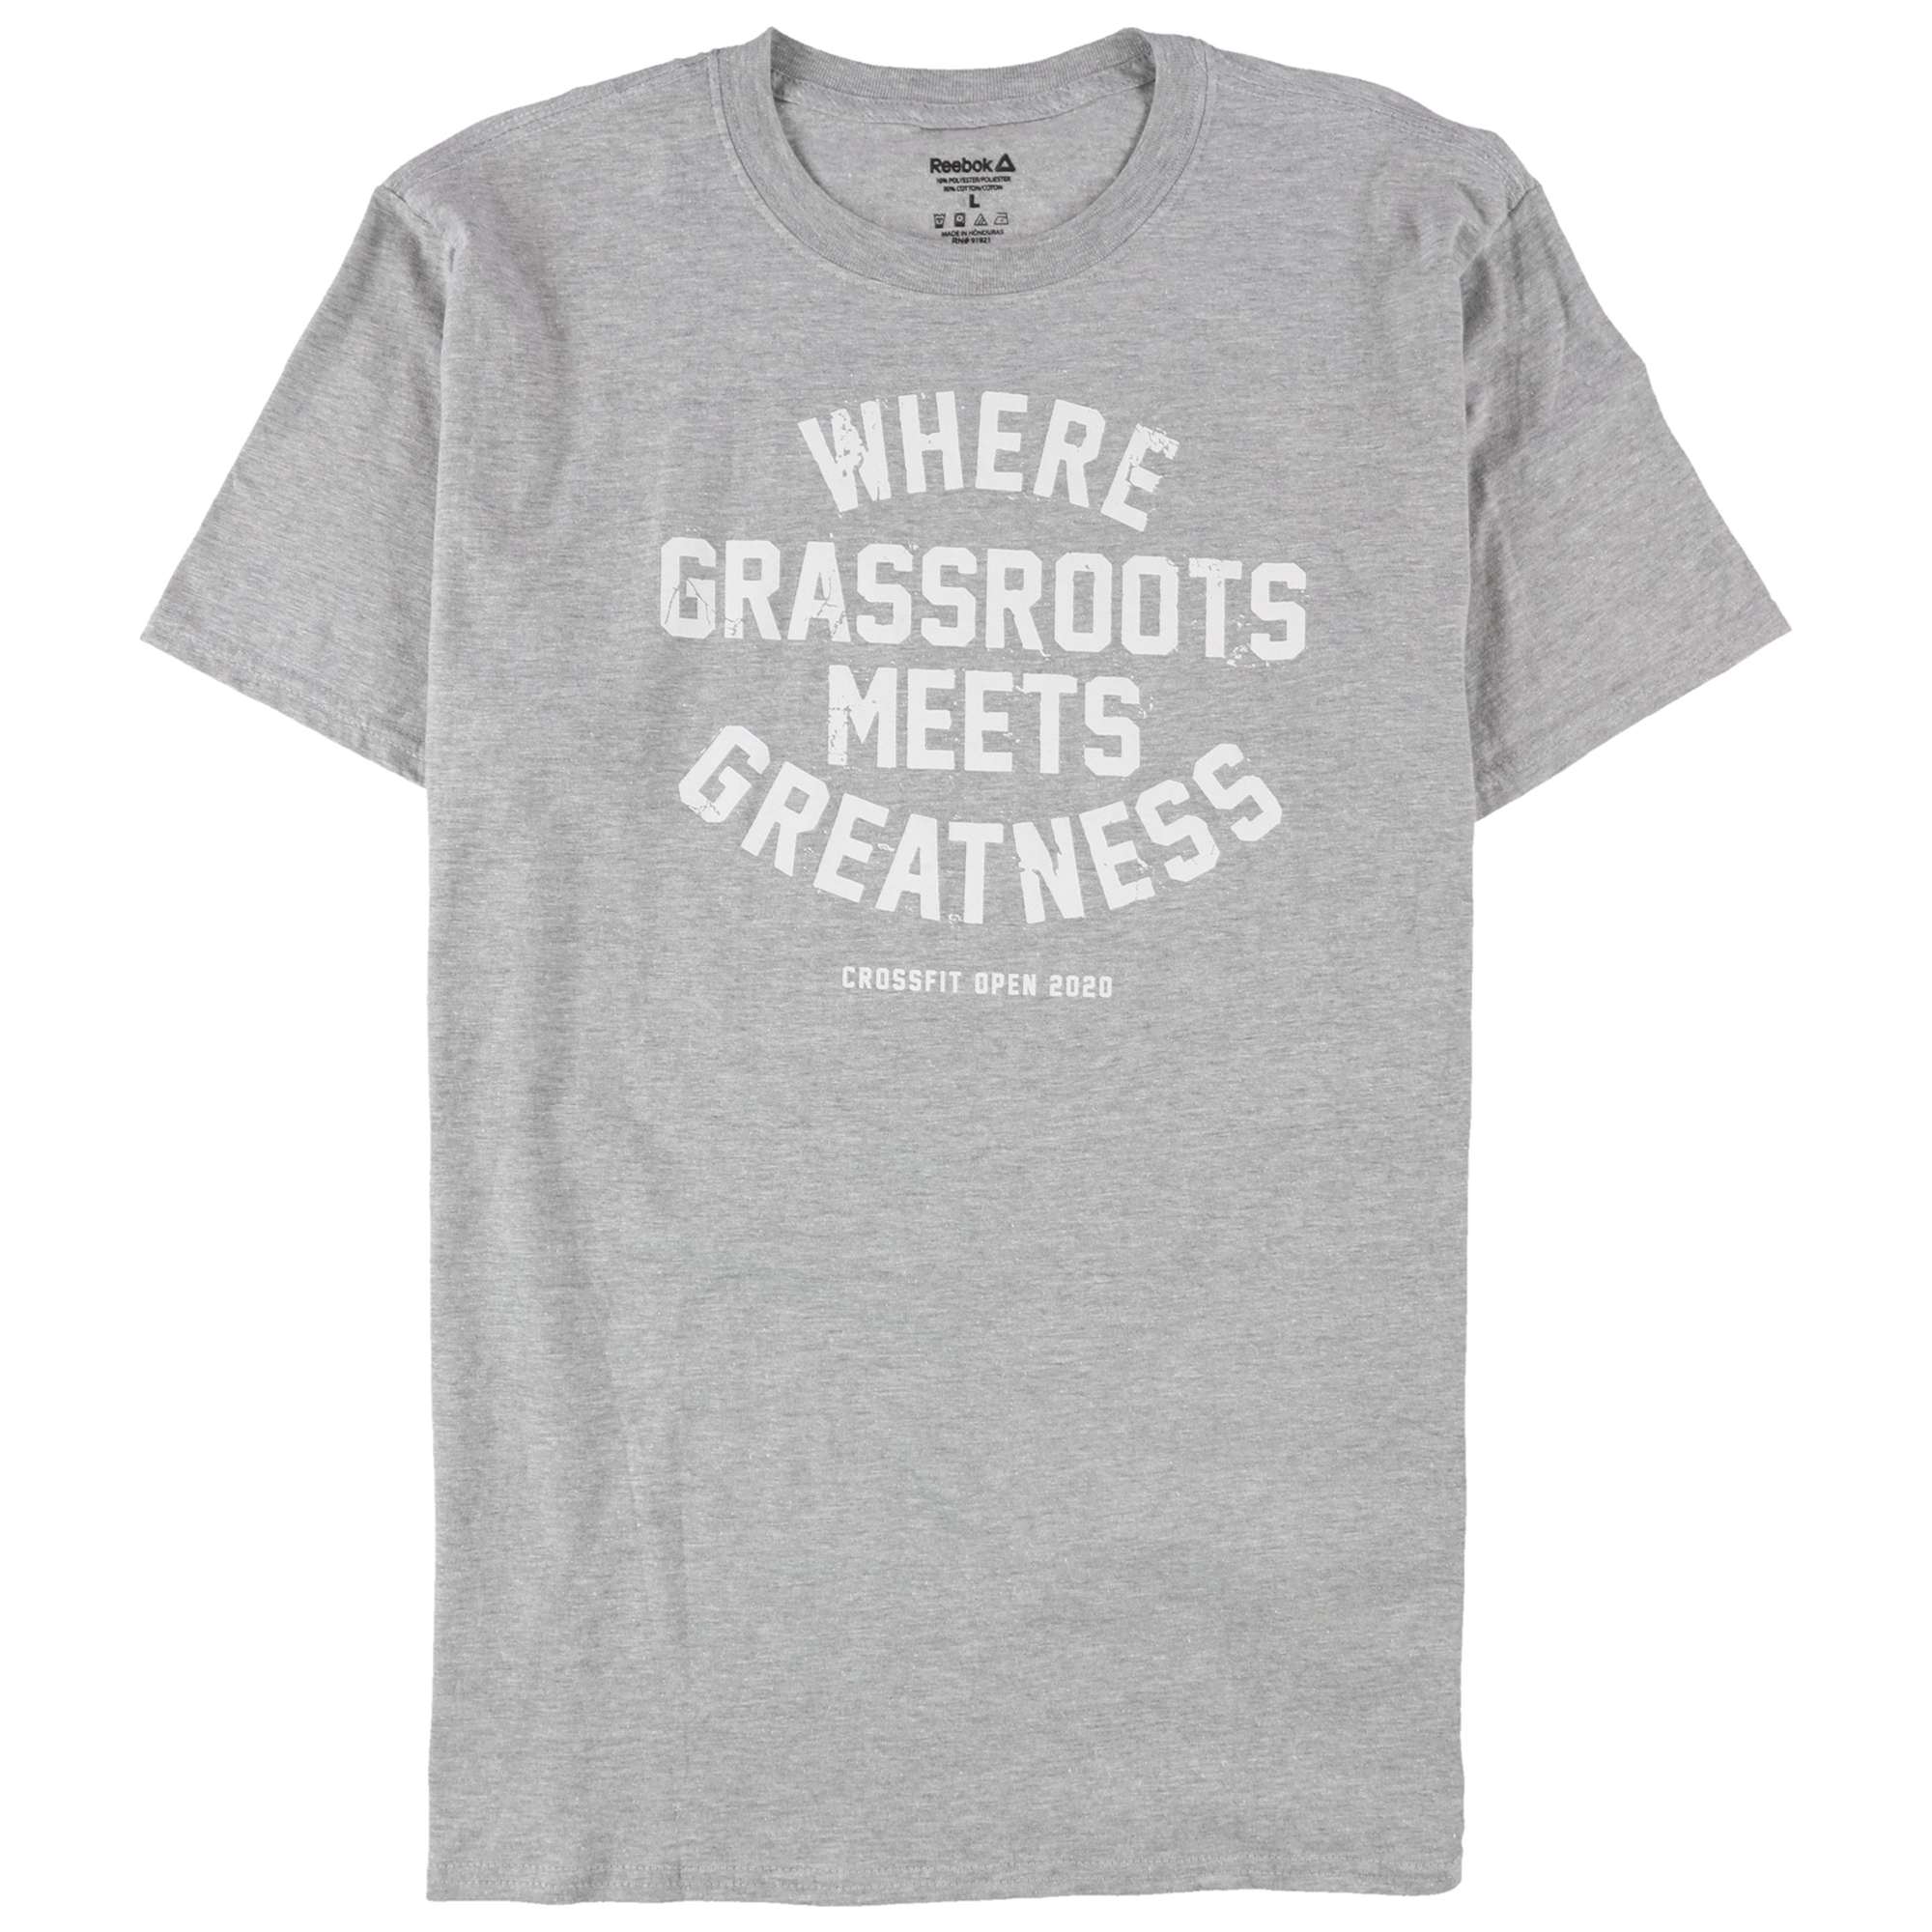 Reebok Mens Where Grassroots Meets Greatness Graphic T-Shirt